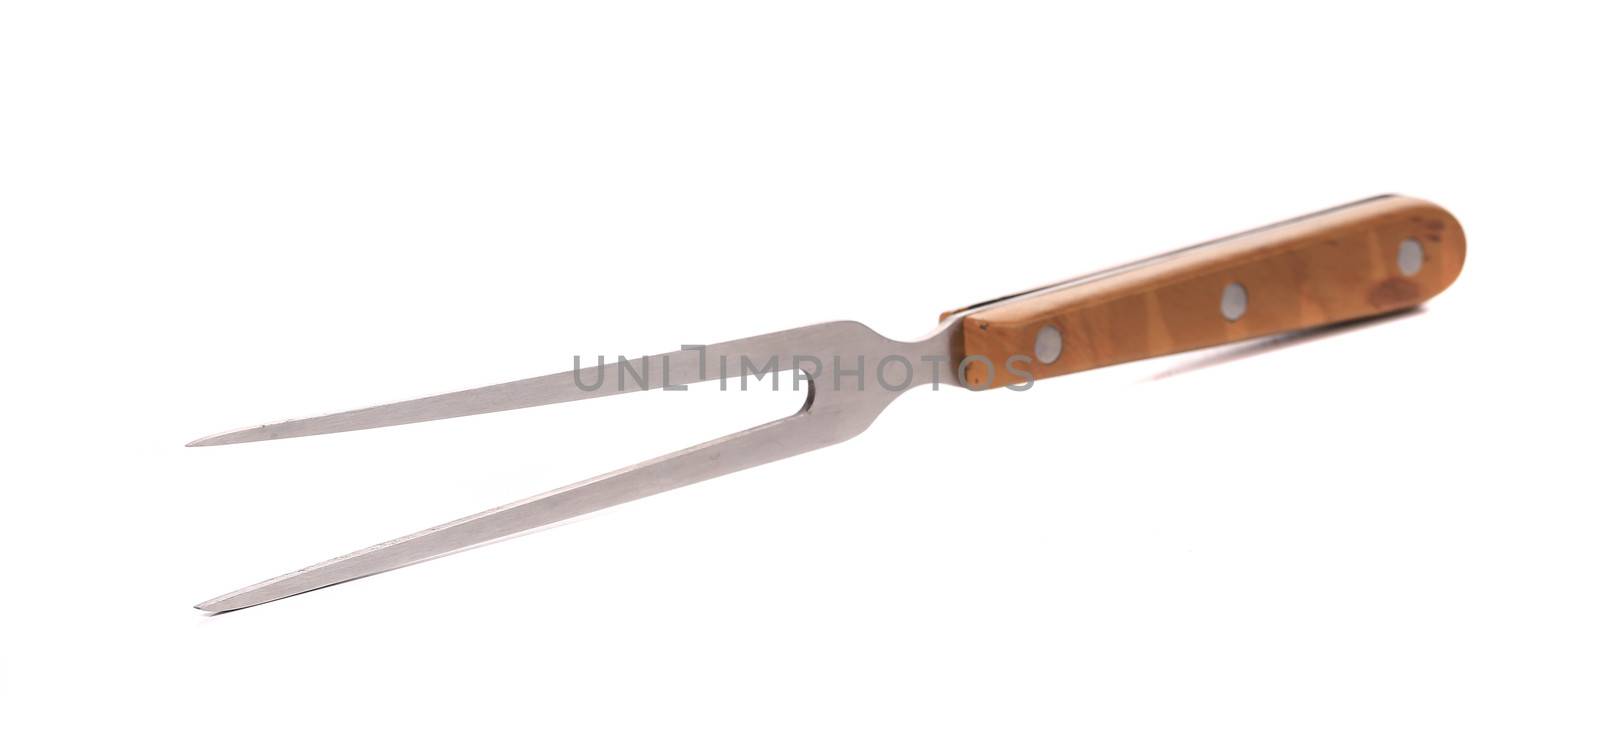 Close up of cheese fork. Isolated on a white background.